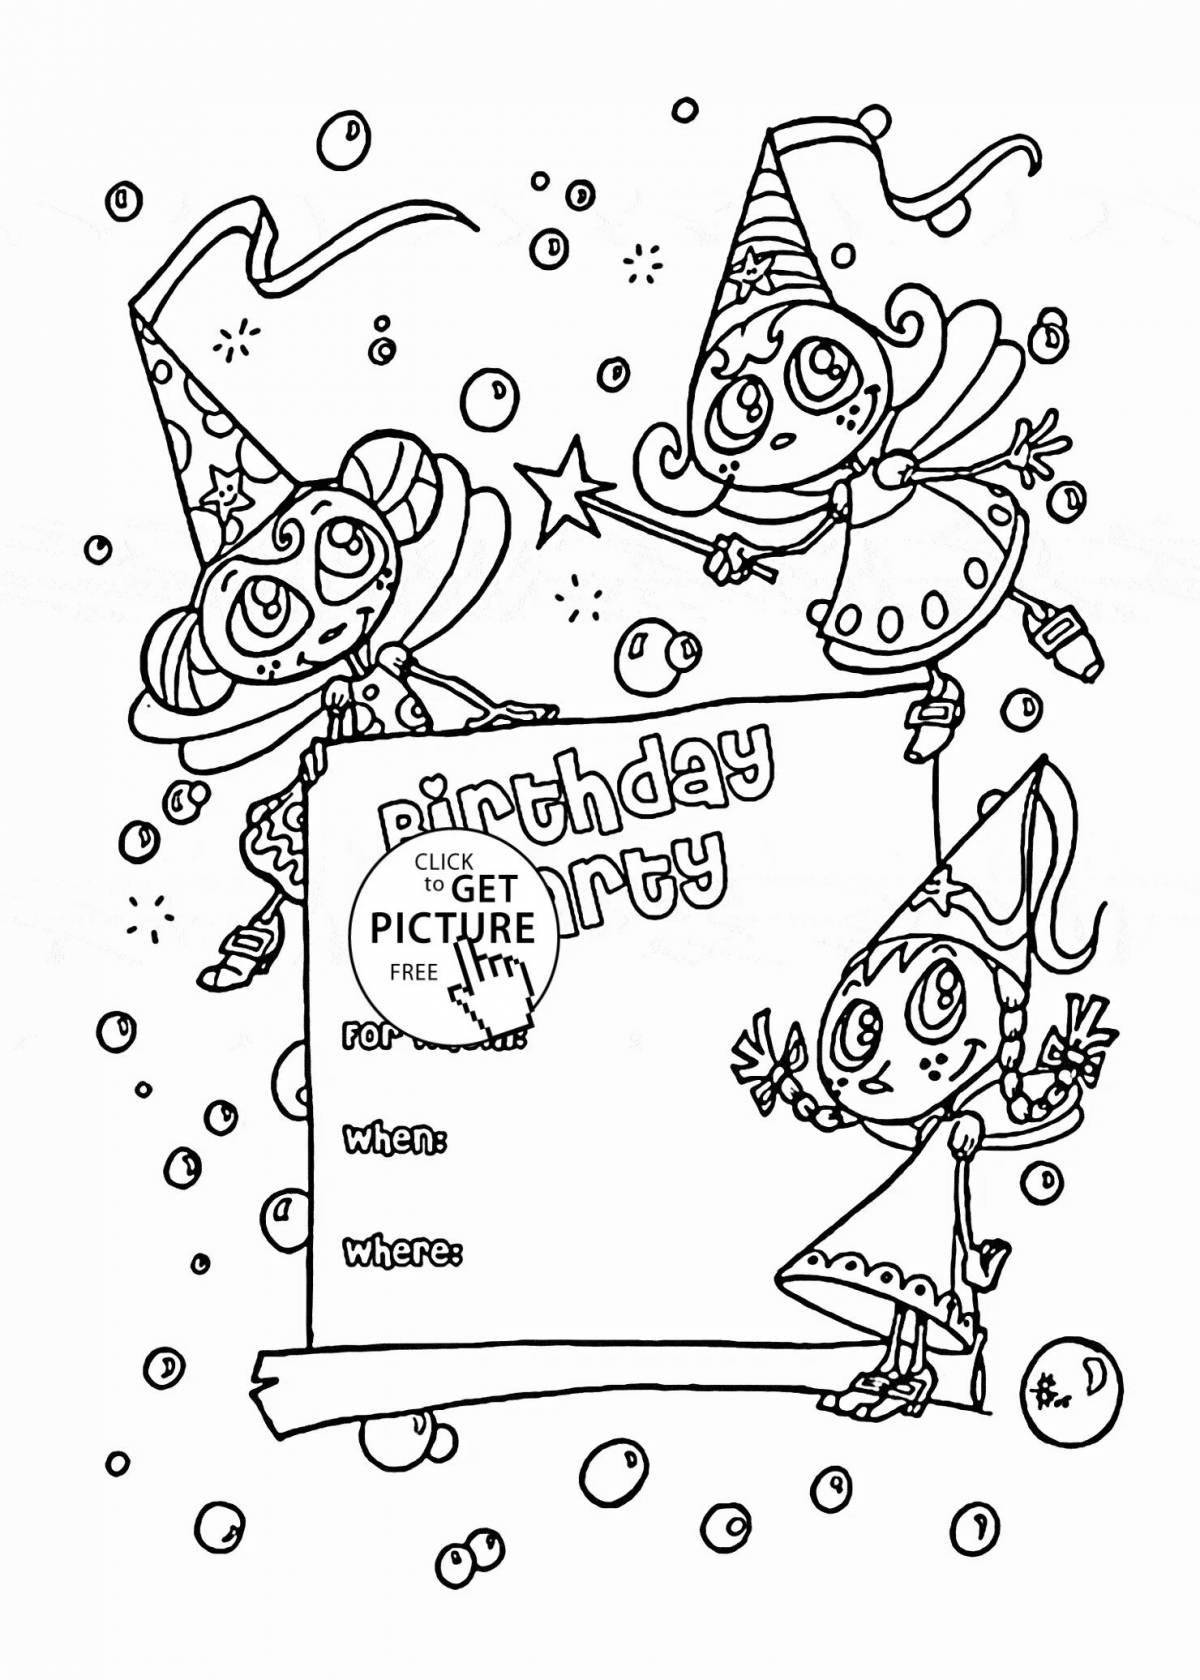 Coloring page for nice girls birthday invitation